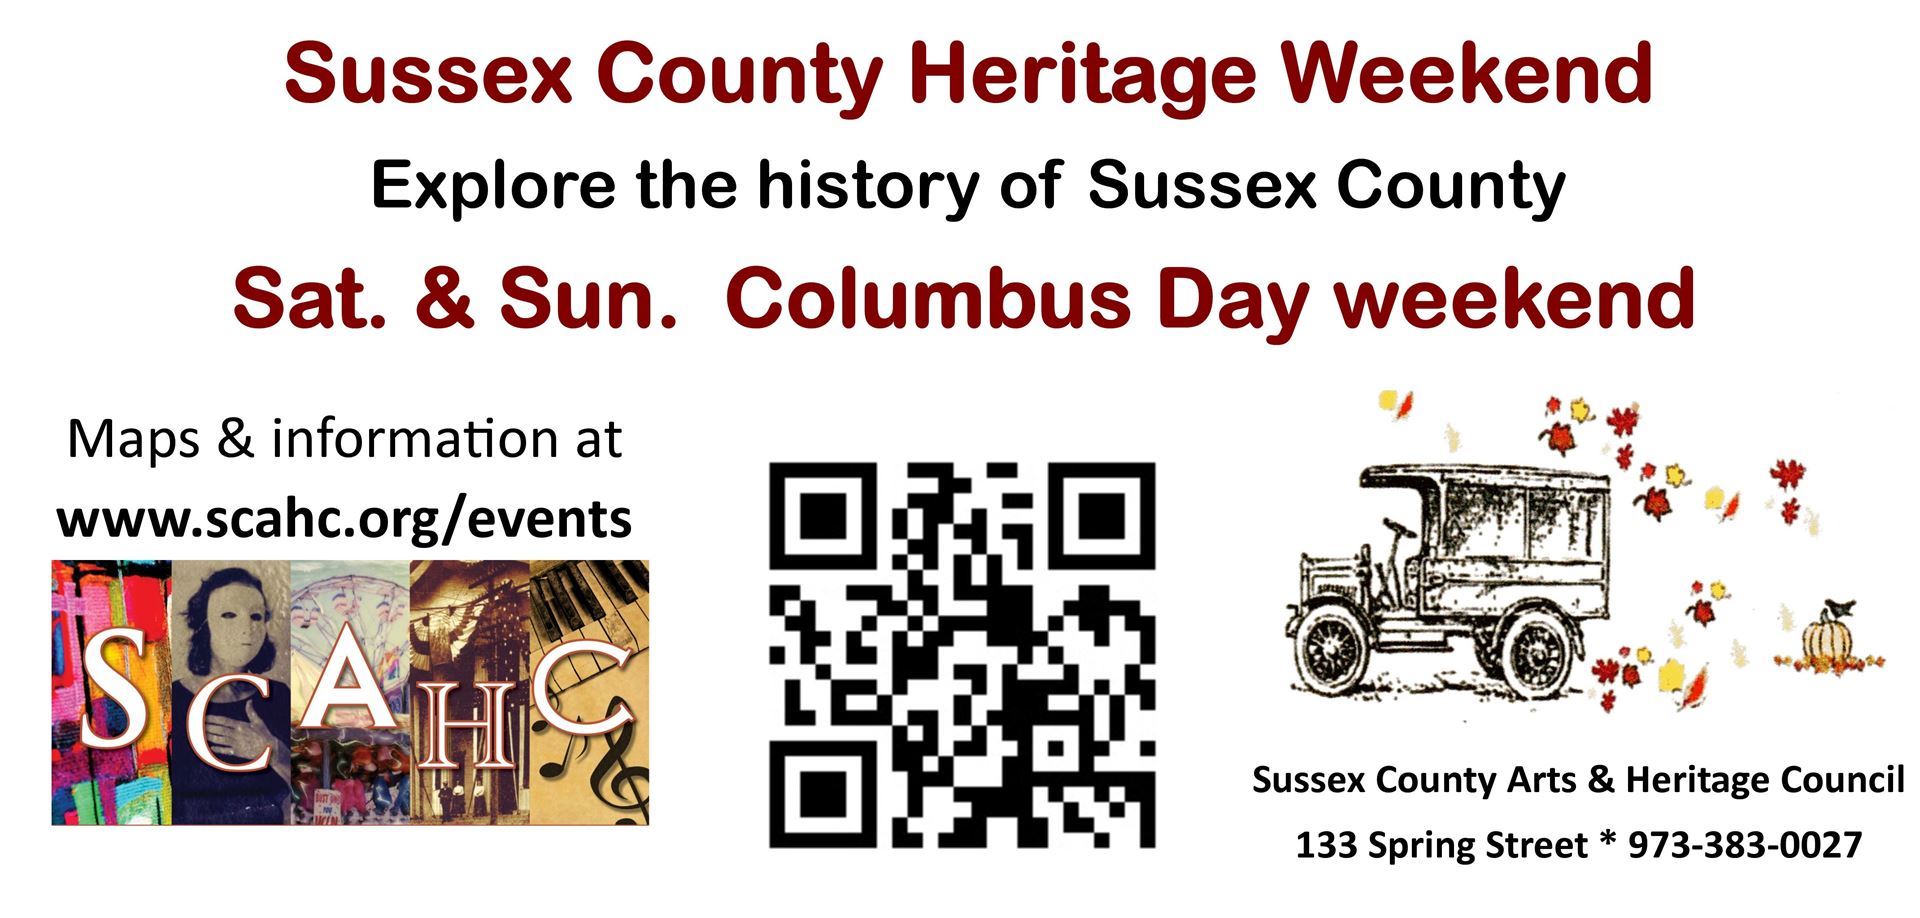 Sussex County Heritage Weekend Explore the history of Sussex County Sat & Sun Columbus Day Weekend Maps & information at www.scahc.org/events